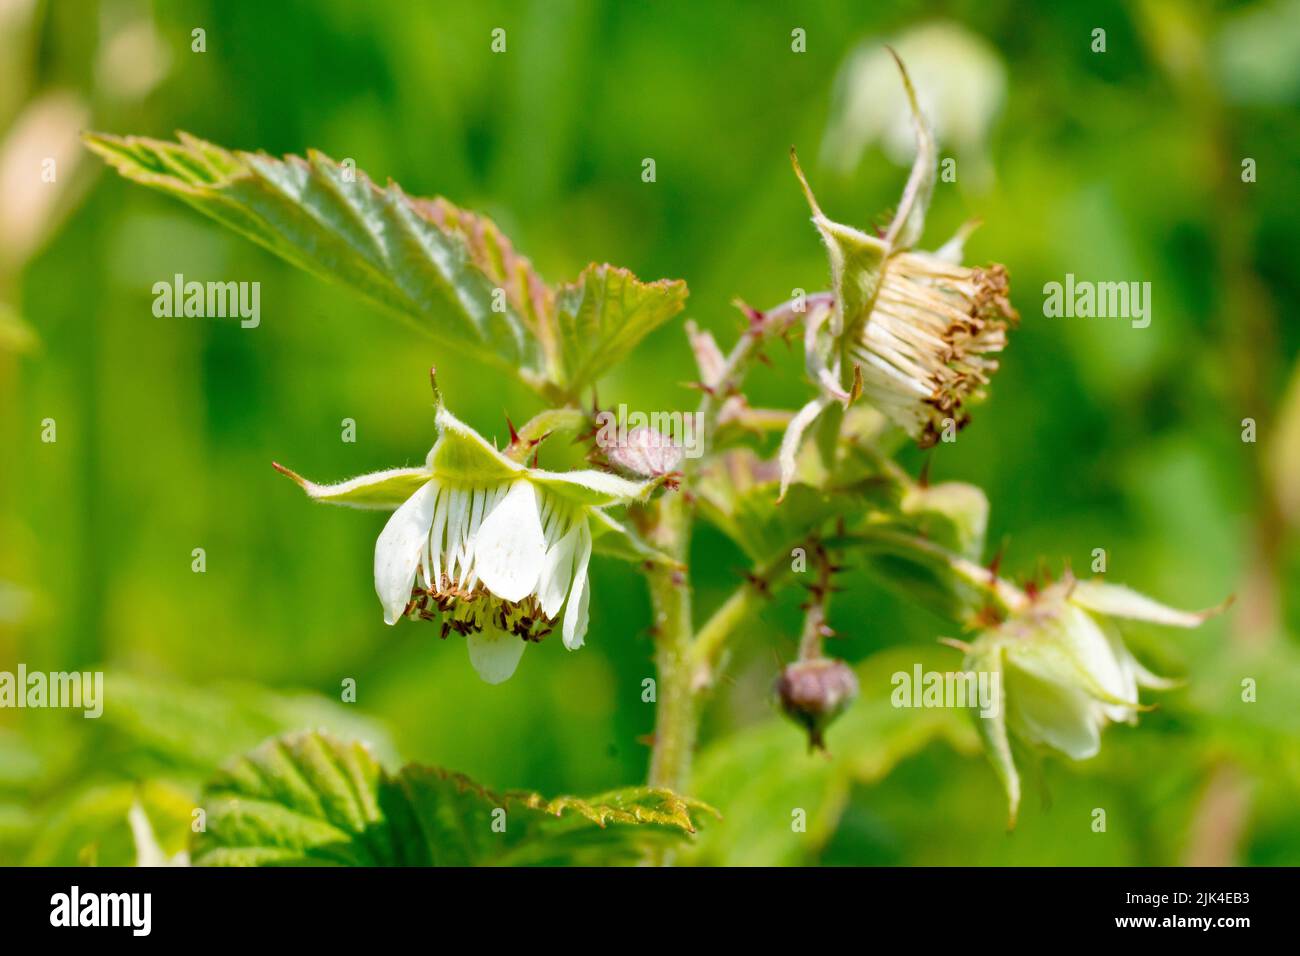 Raspberry (rubus idaeus), close up of the small white flowers of the wild variety of the shrub from which the cultivated varieties were bred. Stock Photo